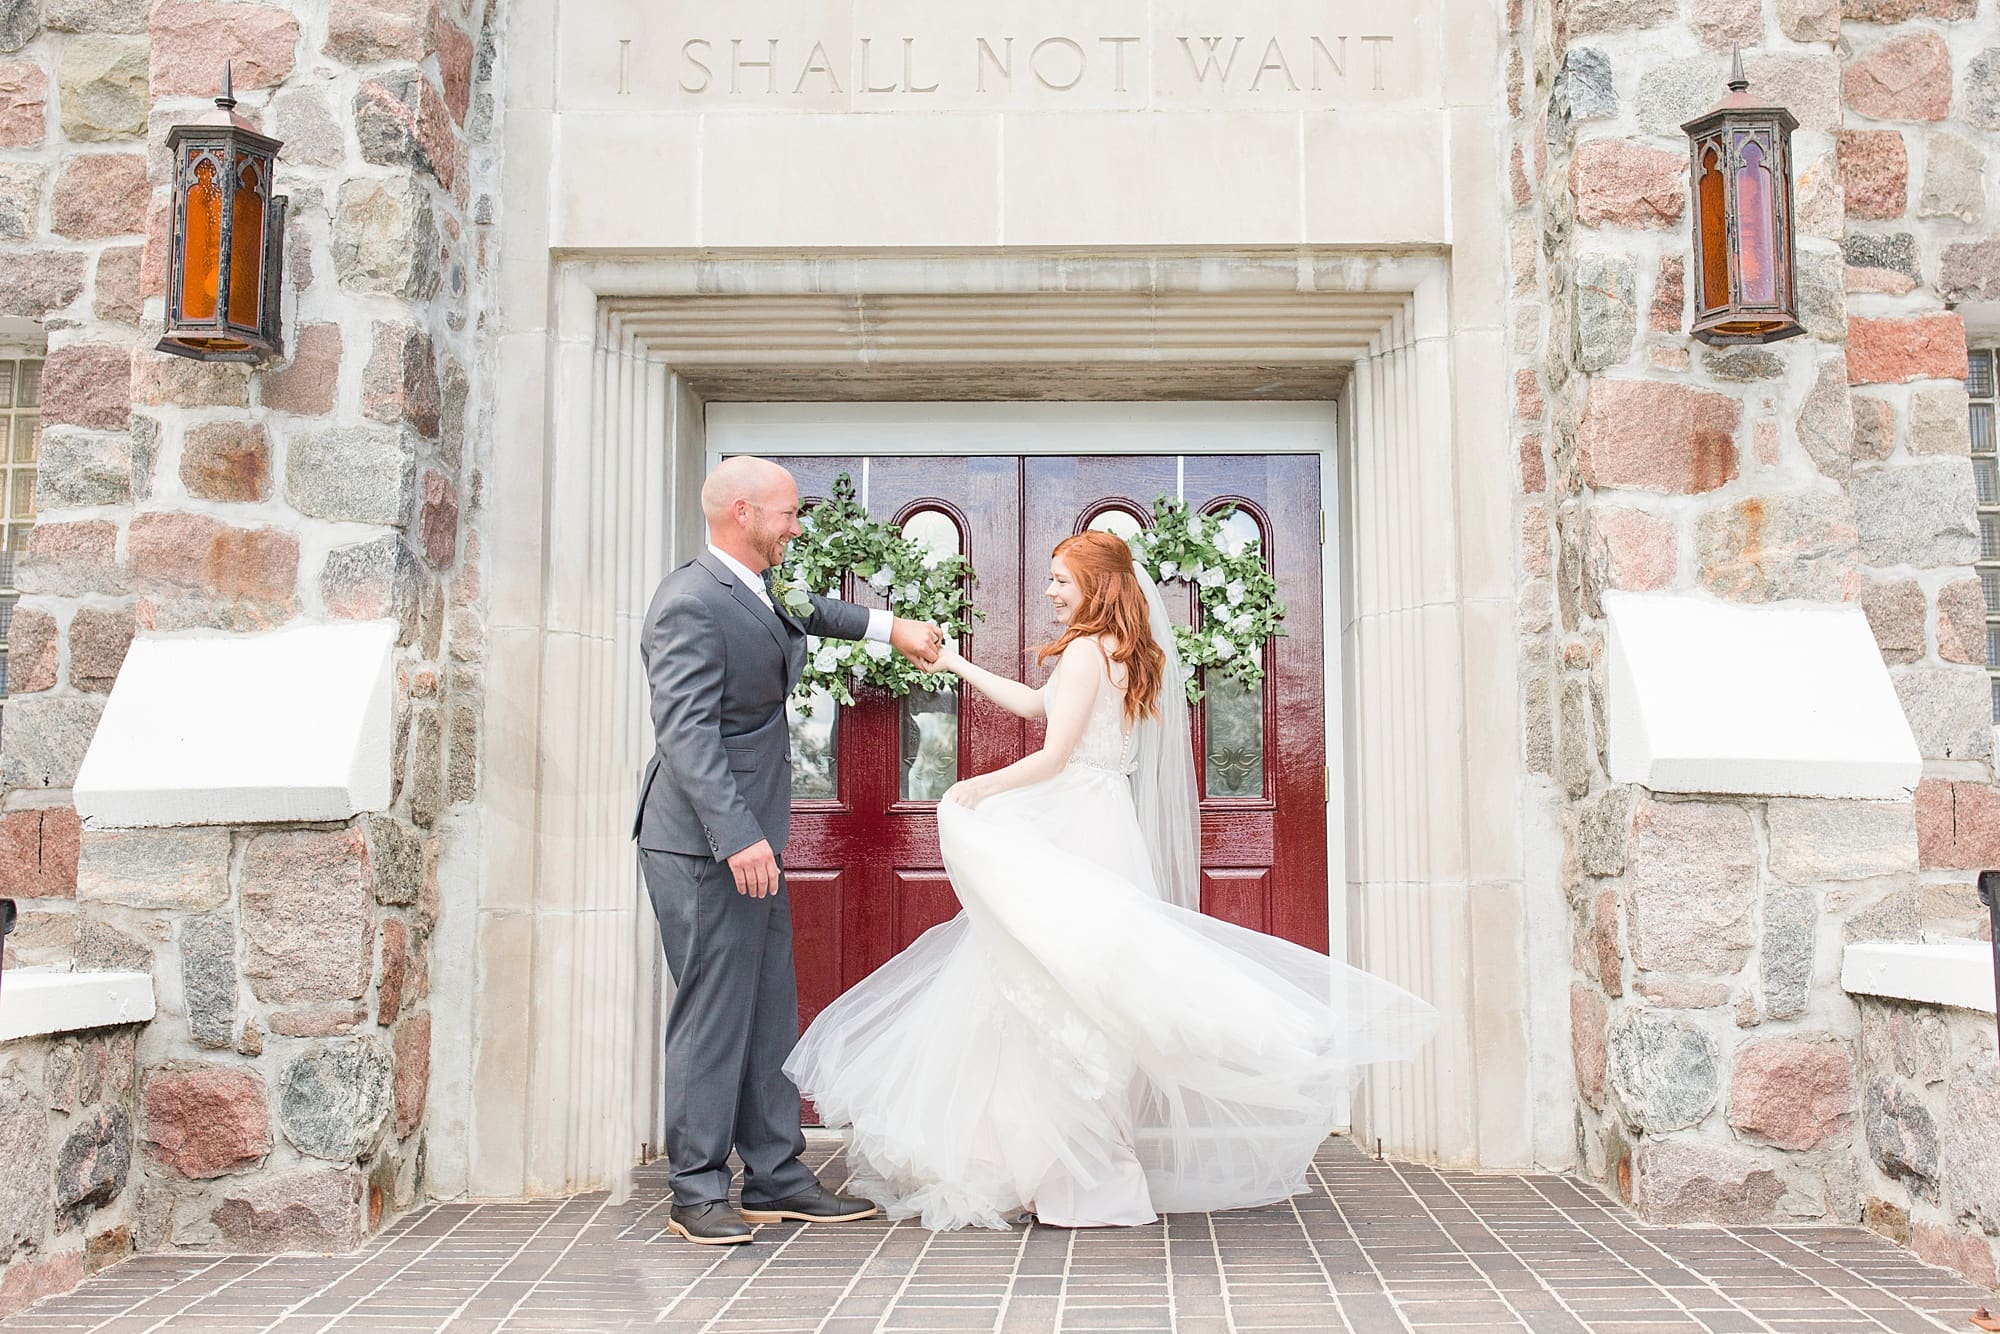 A bride and groom dance outside the front doors of their small town wedding church